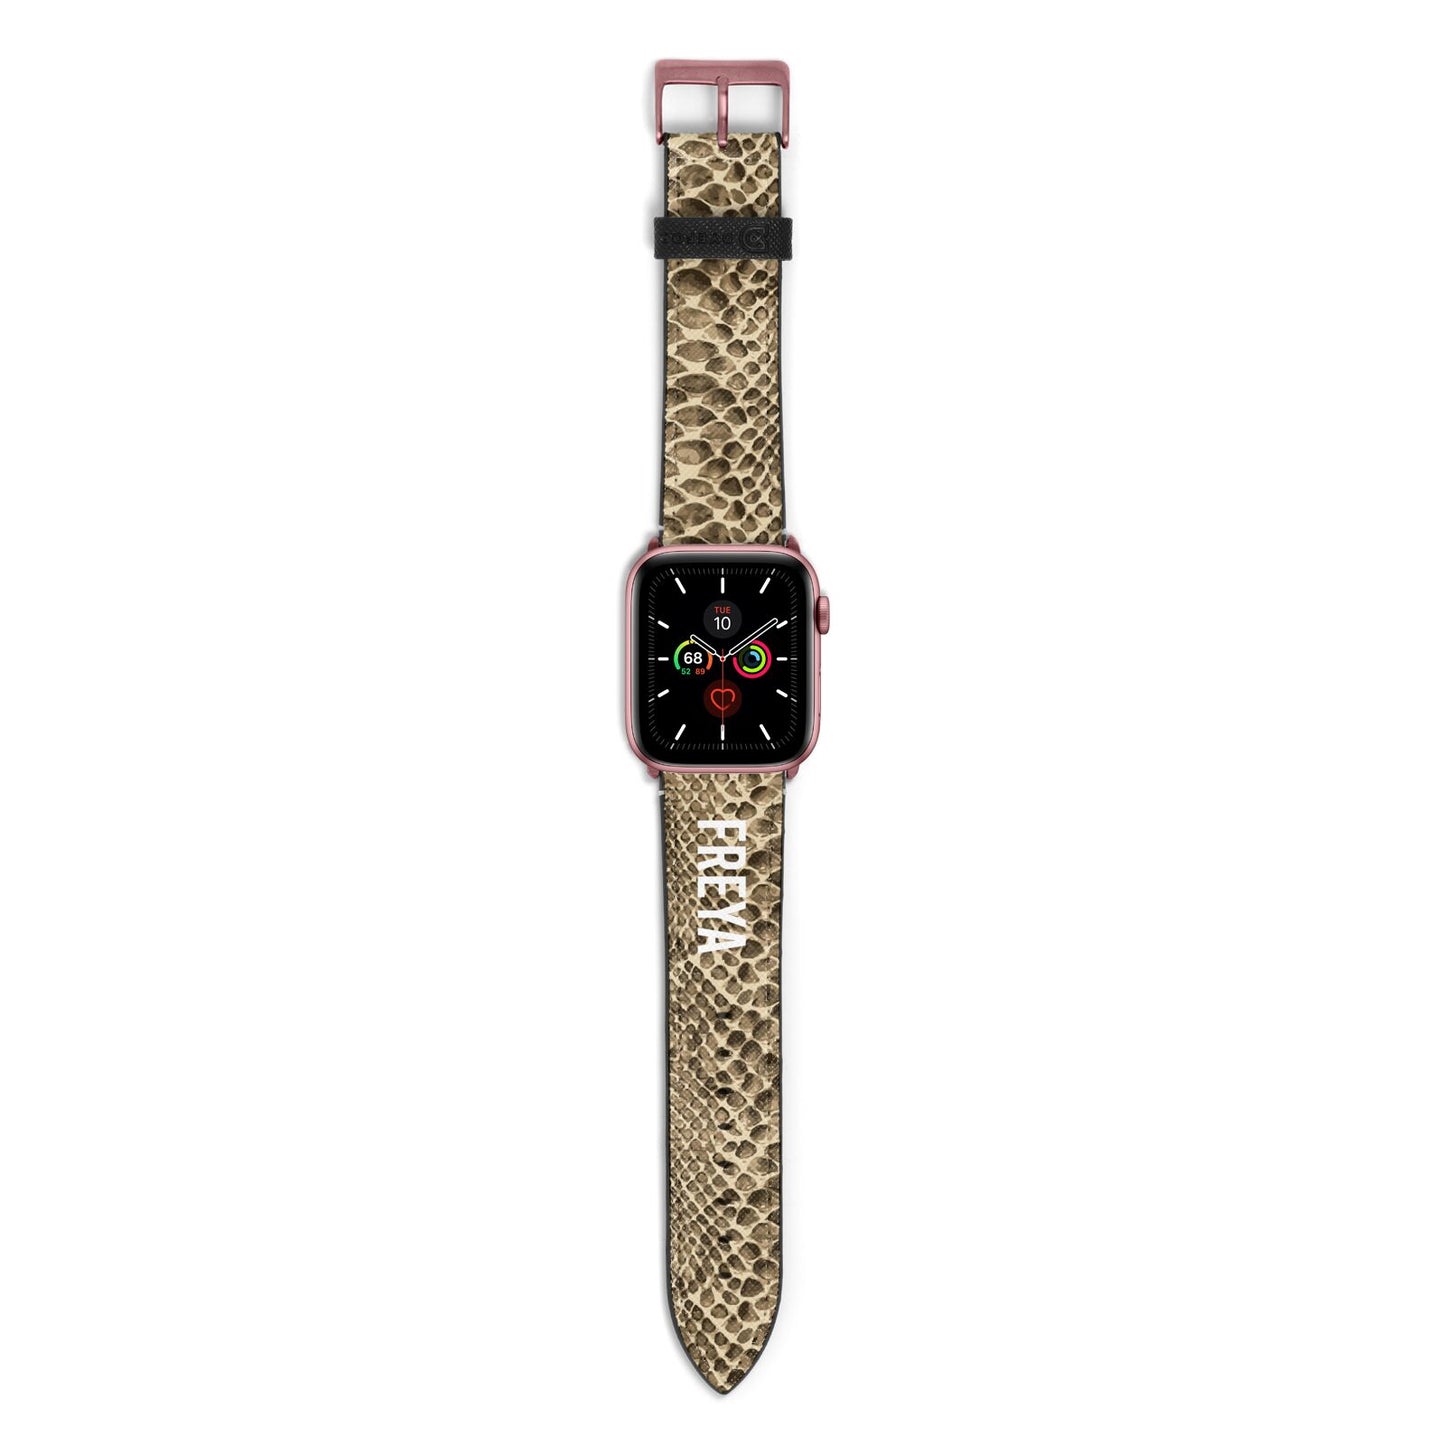 Personalised Tan Snakeskin Apple Watch Strap with Rose Gold Hardware